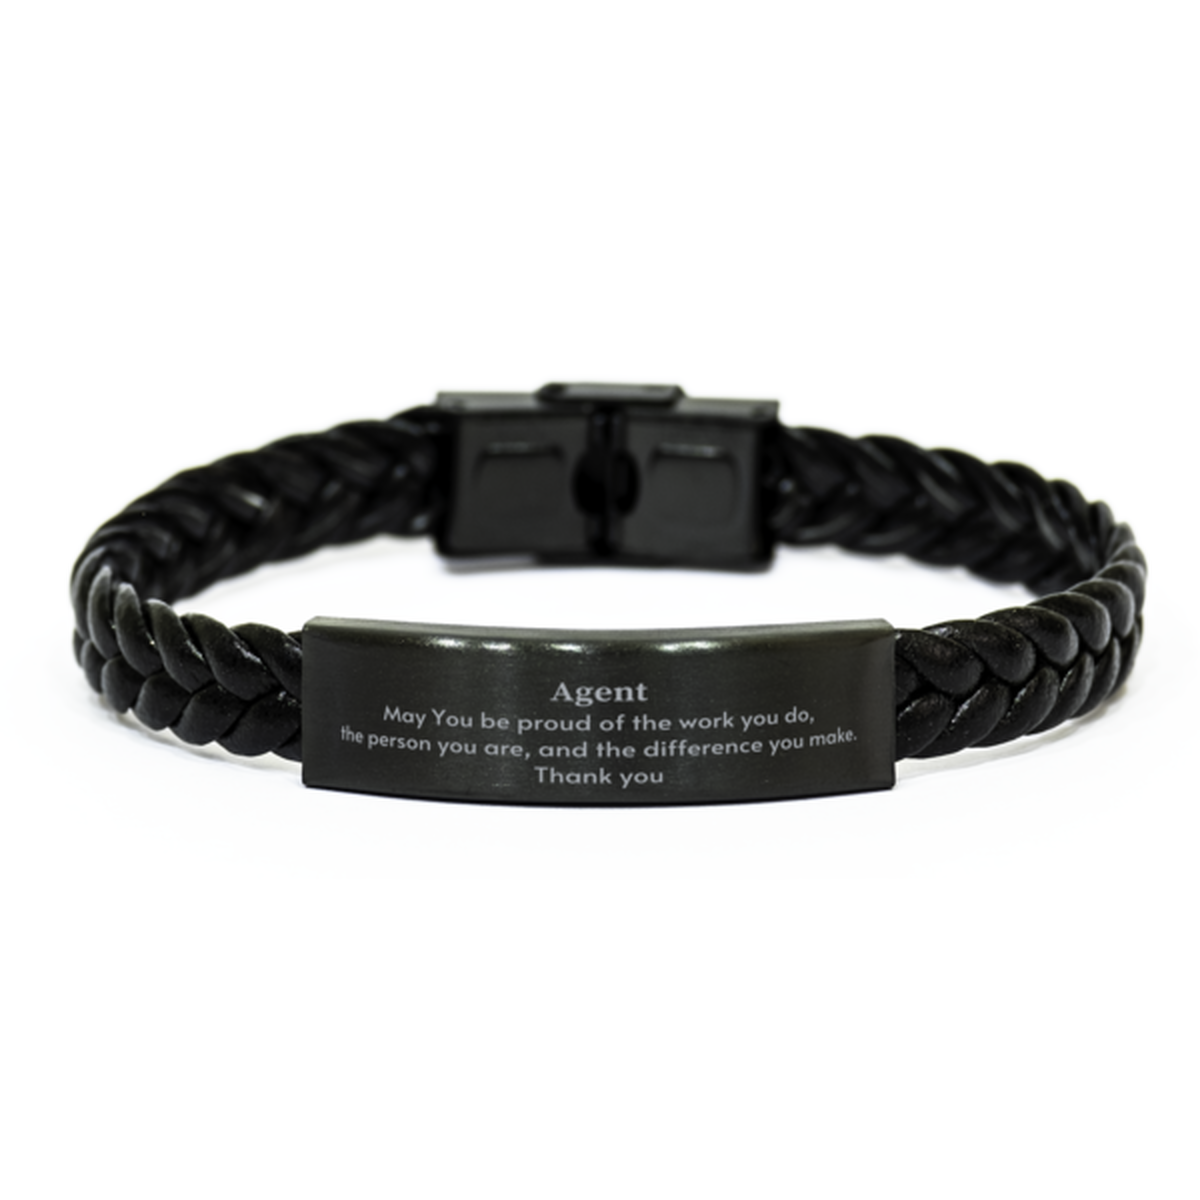 Heartwarming Braided Leather Bracelet Retirement Coworkers Gifts for Agent, Agent May You be proud of the work you do, the person you are Gifts for Boss Men Women Friends